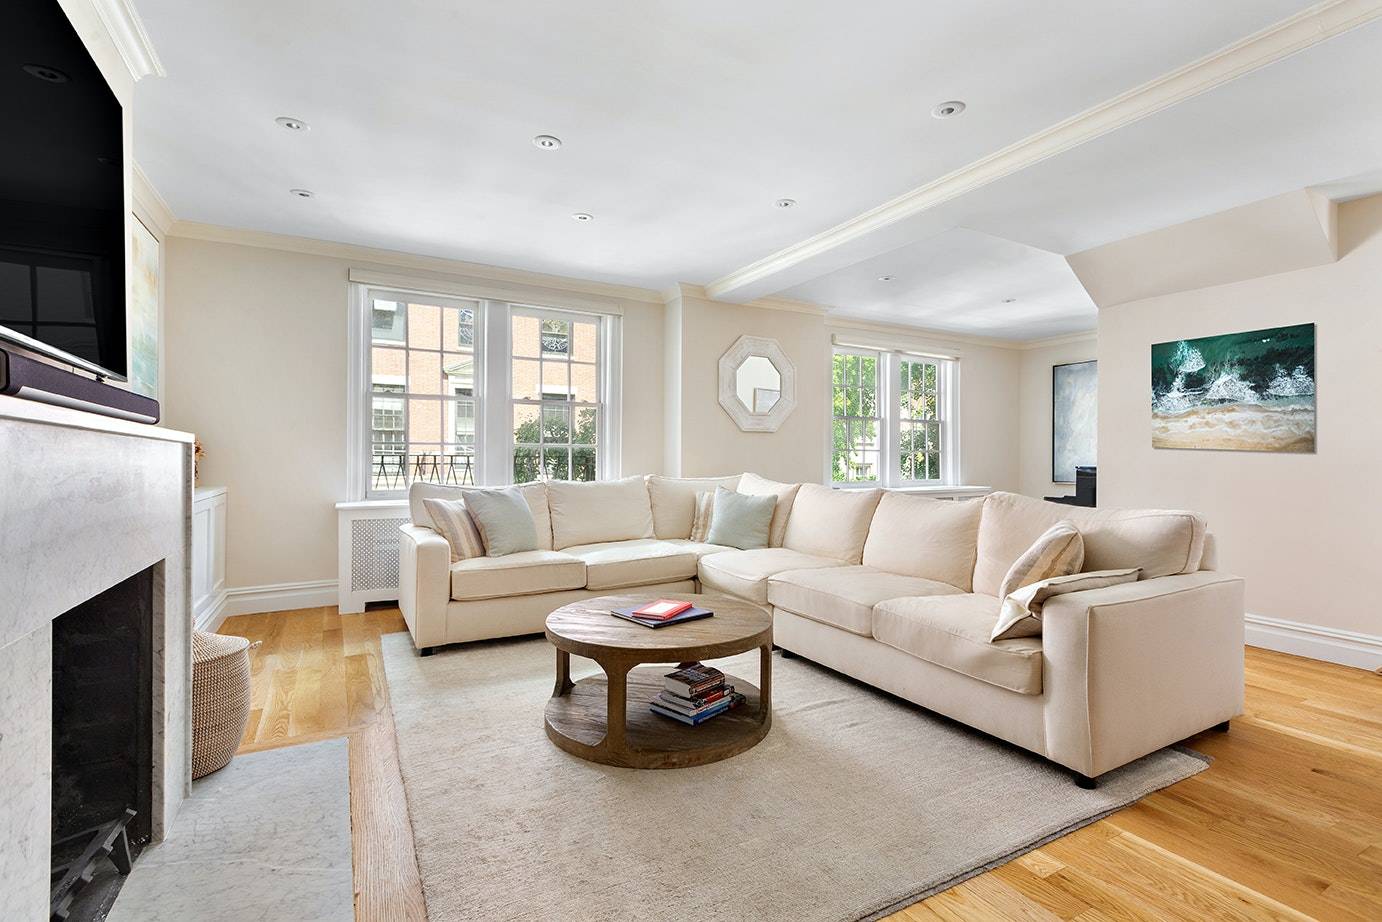 222 East 71st Street is perfectly situated on a charming tree lined block in the heart of the Upper East Side.